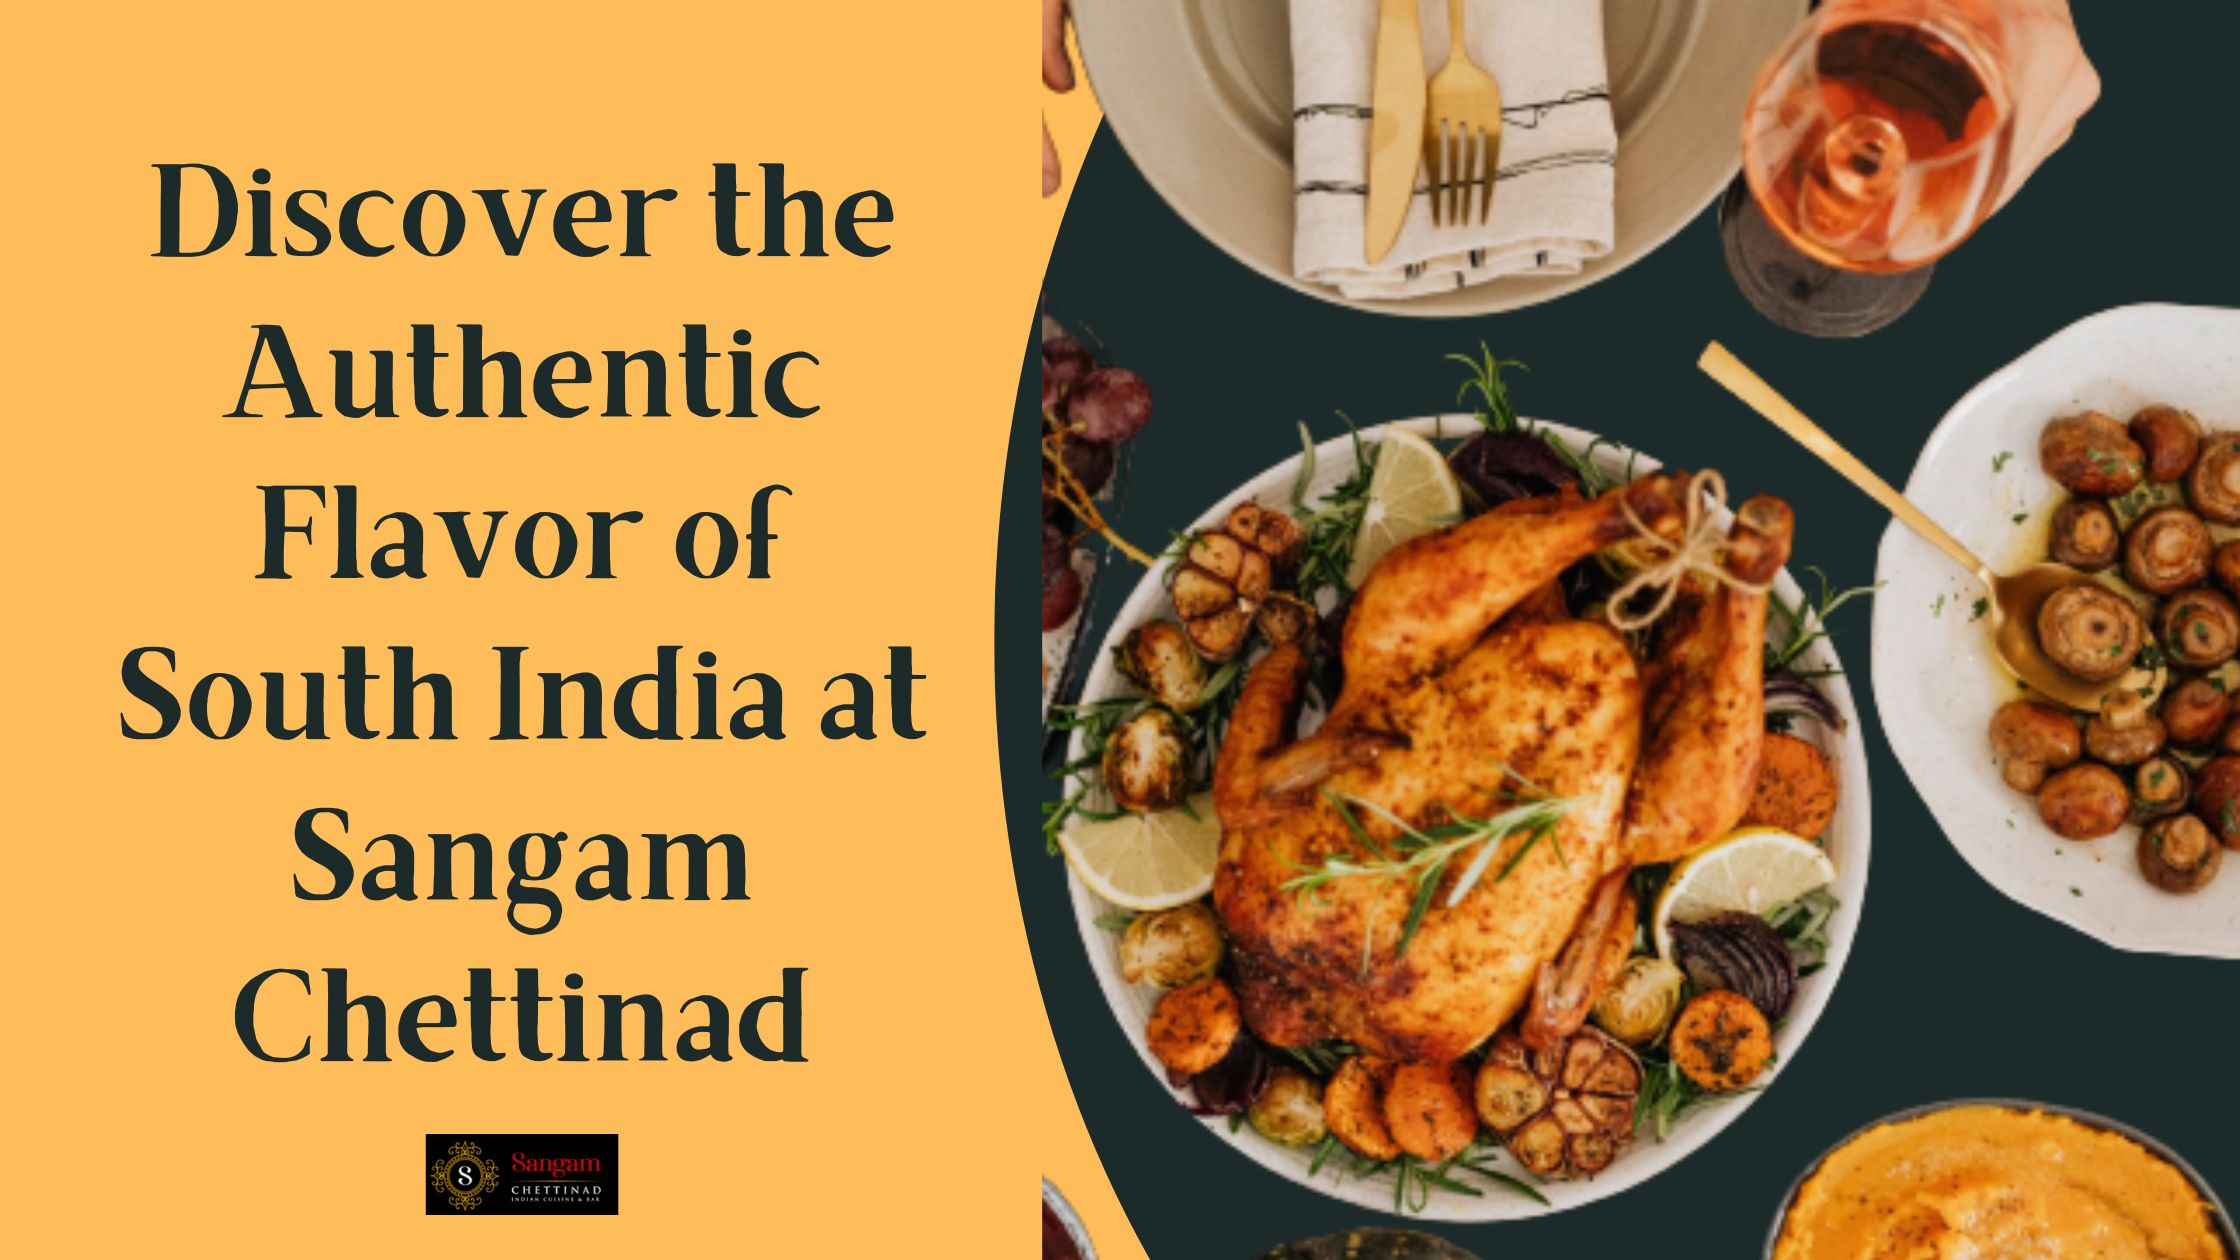 Discover the Authentic Flavor of South India at Sangam Chettinad